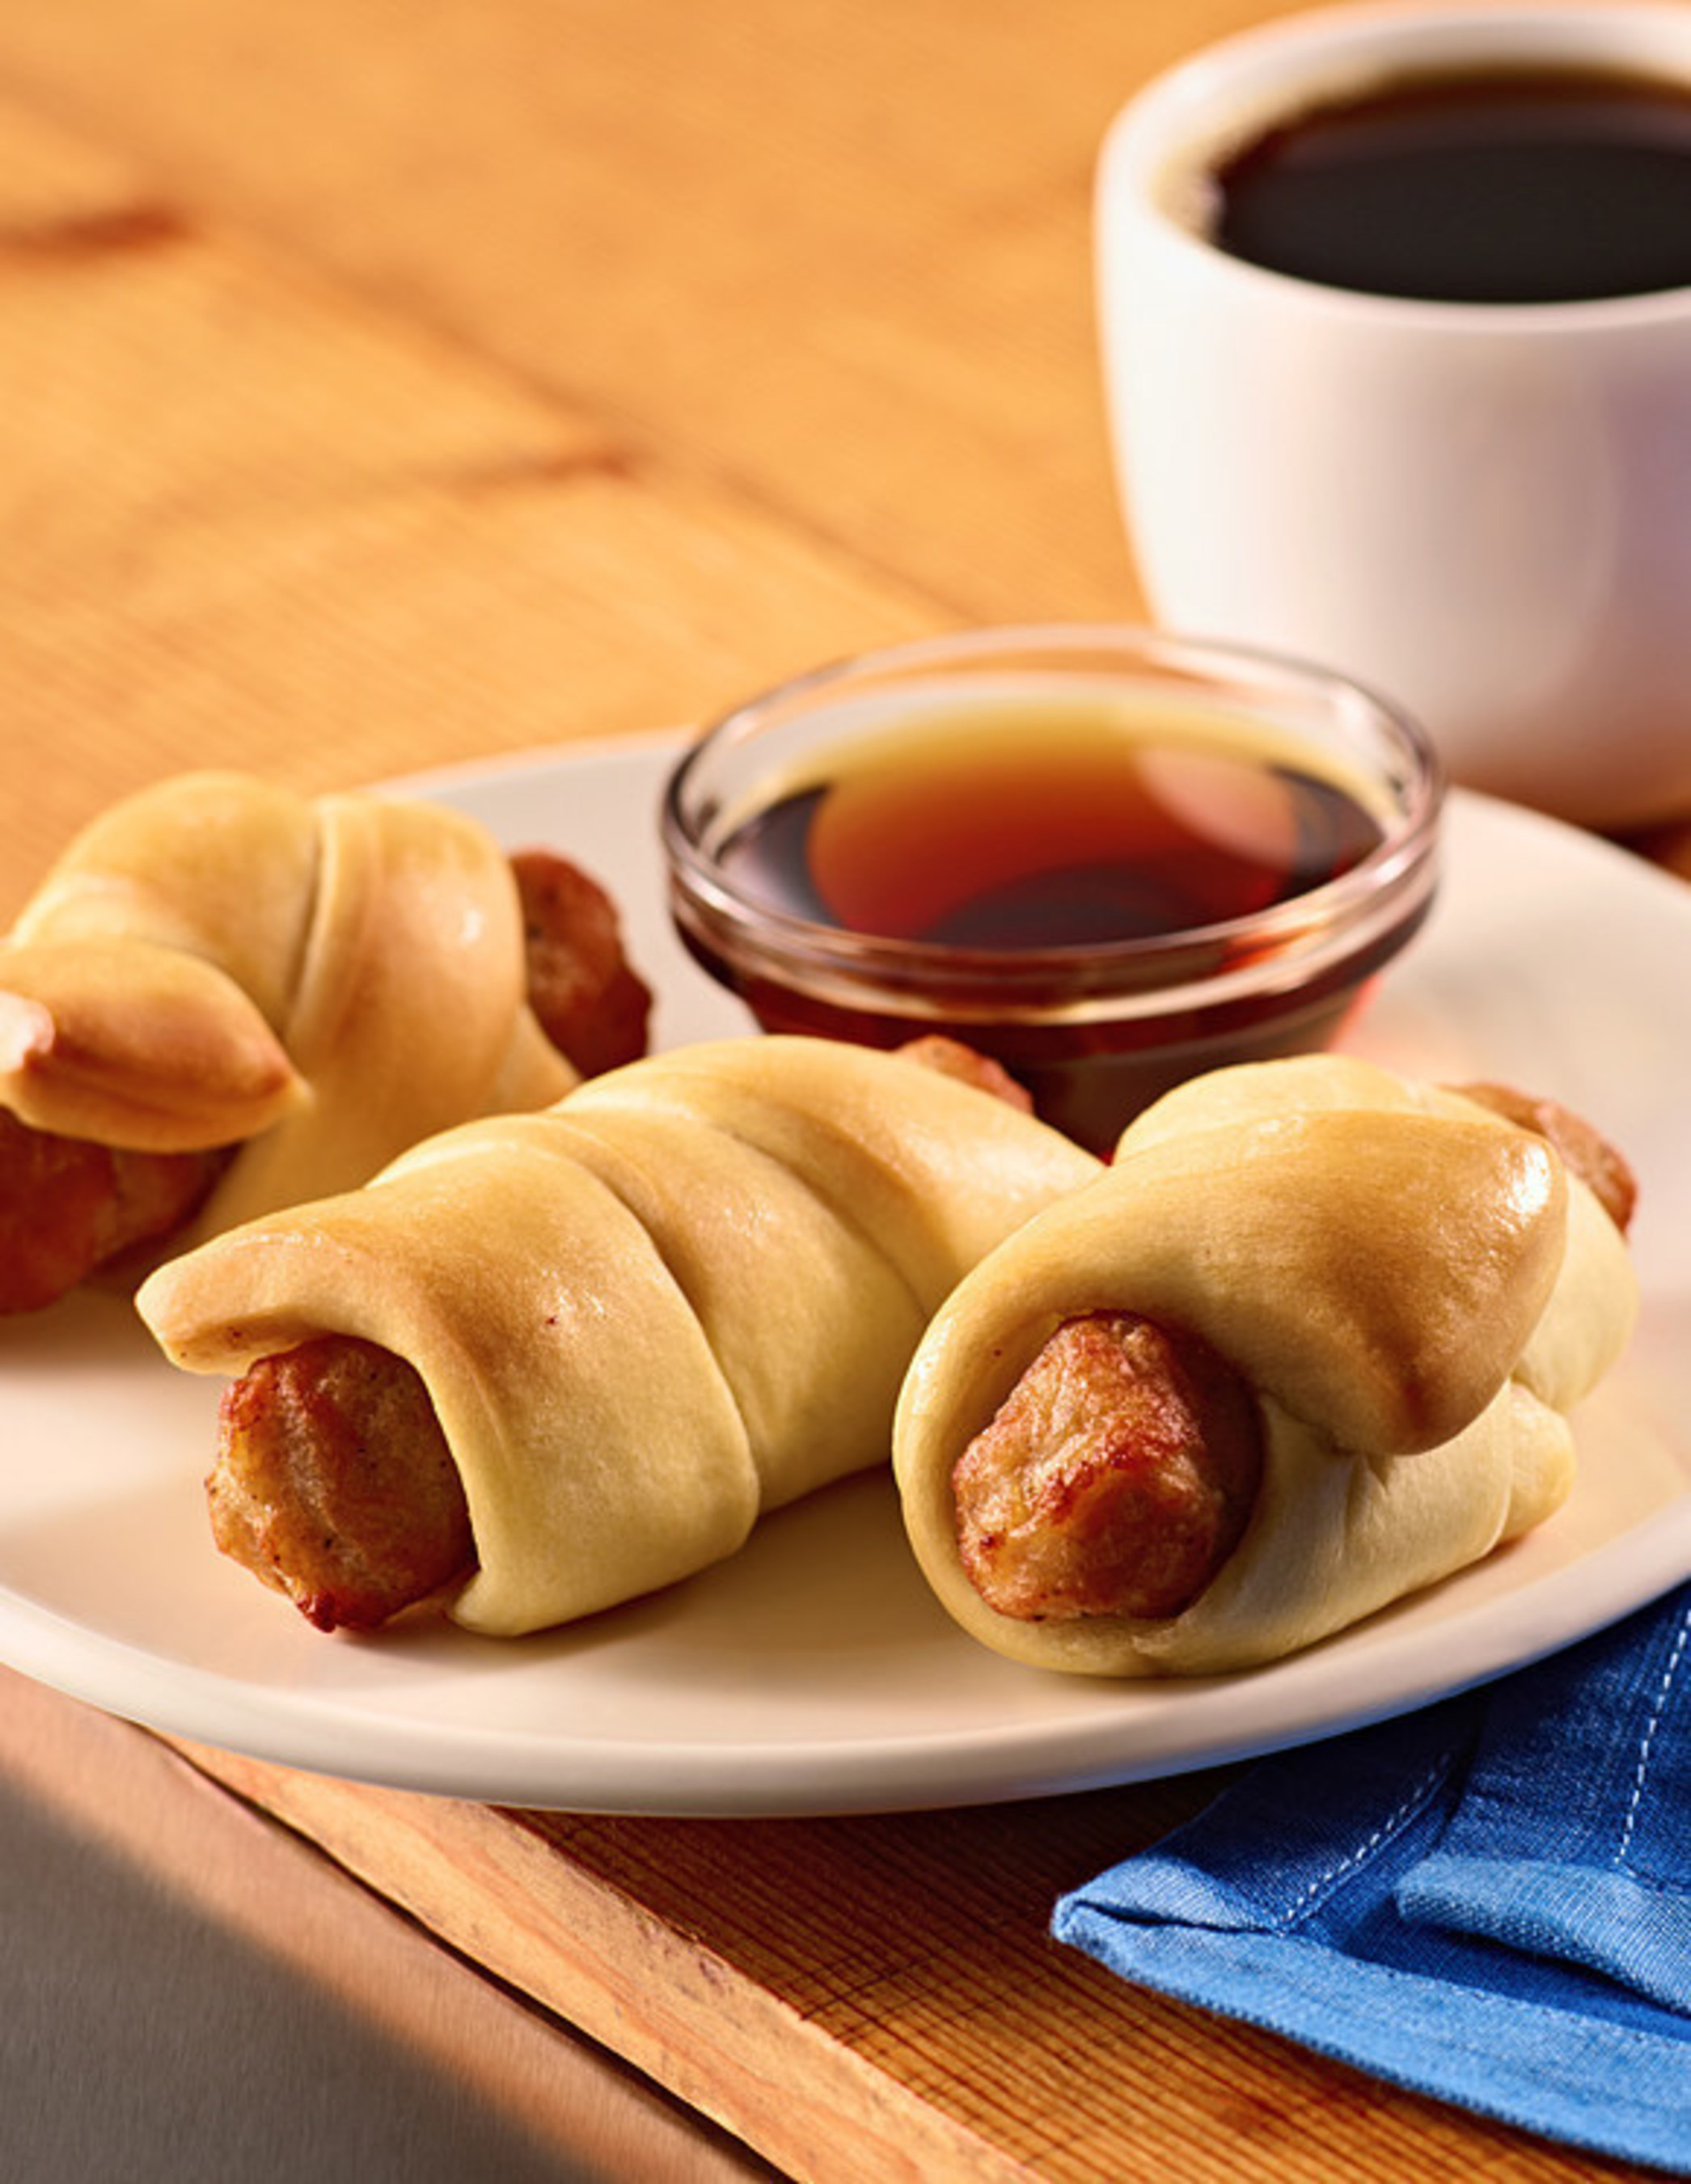 Cinnabon Sausage Bites are now available at select locations nationwide